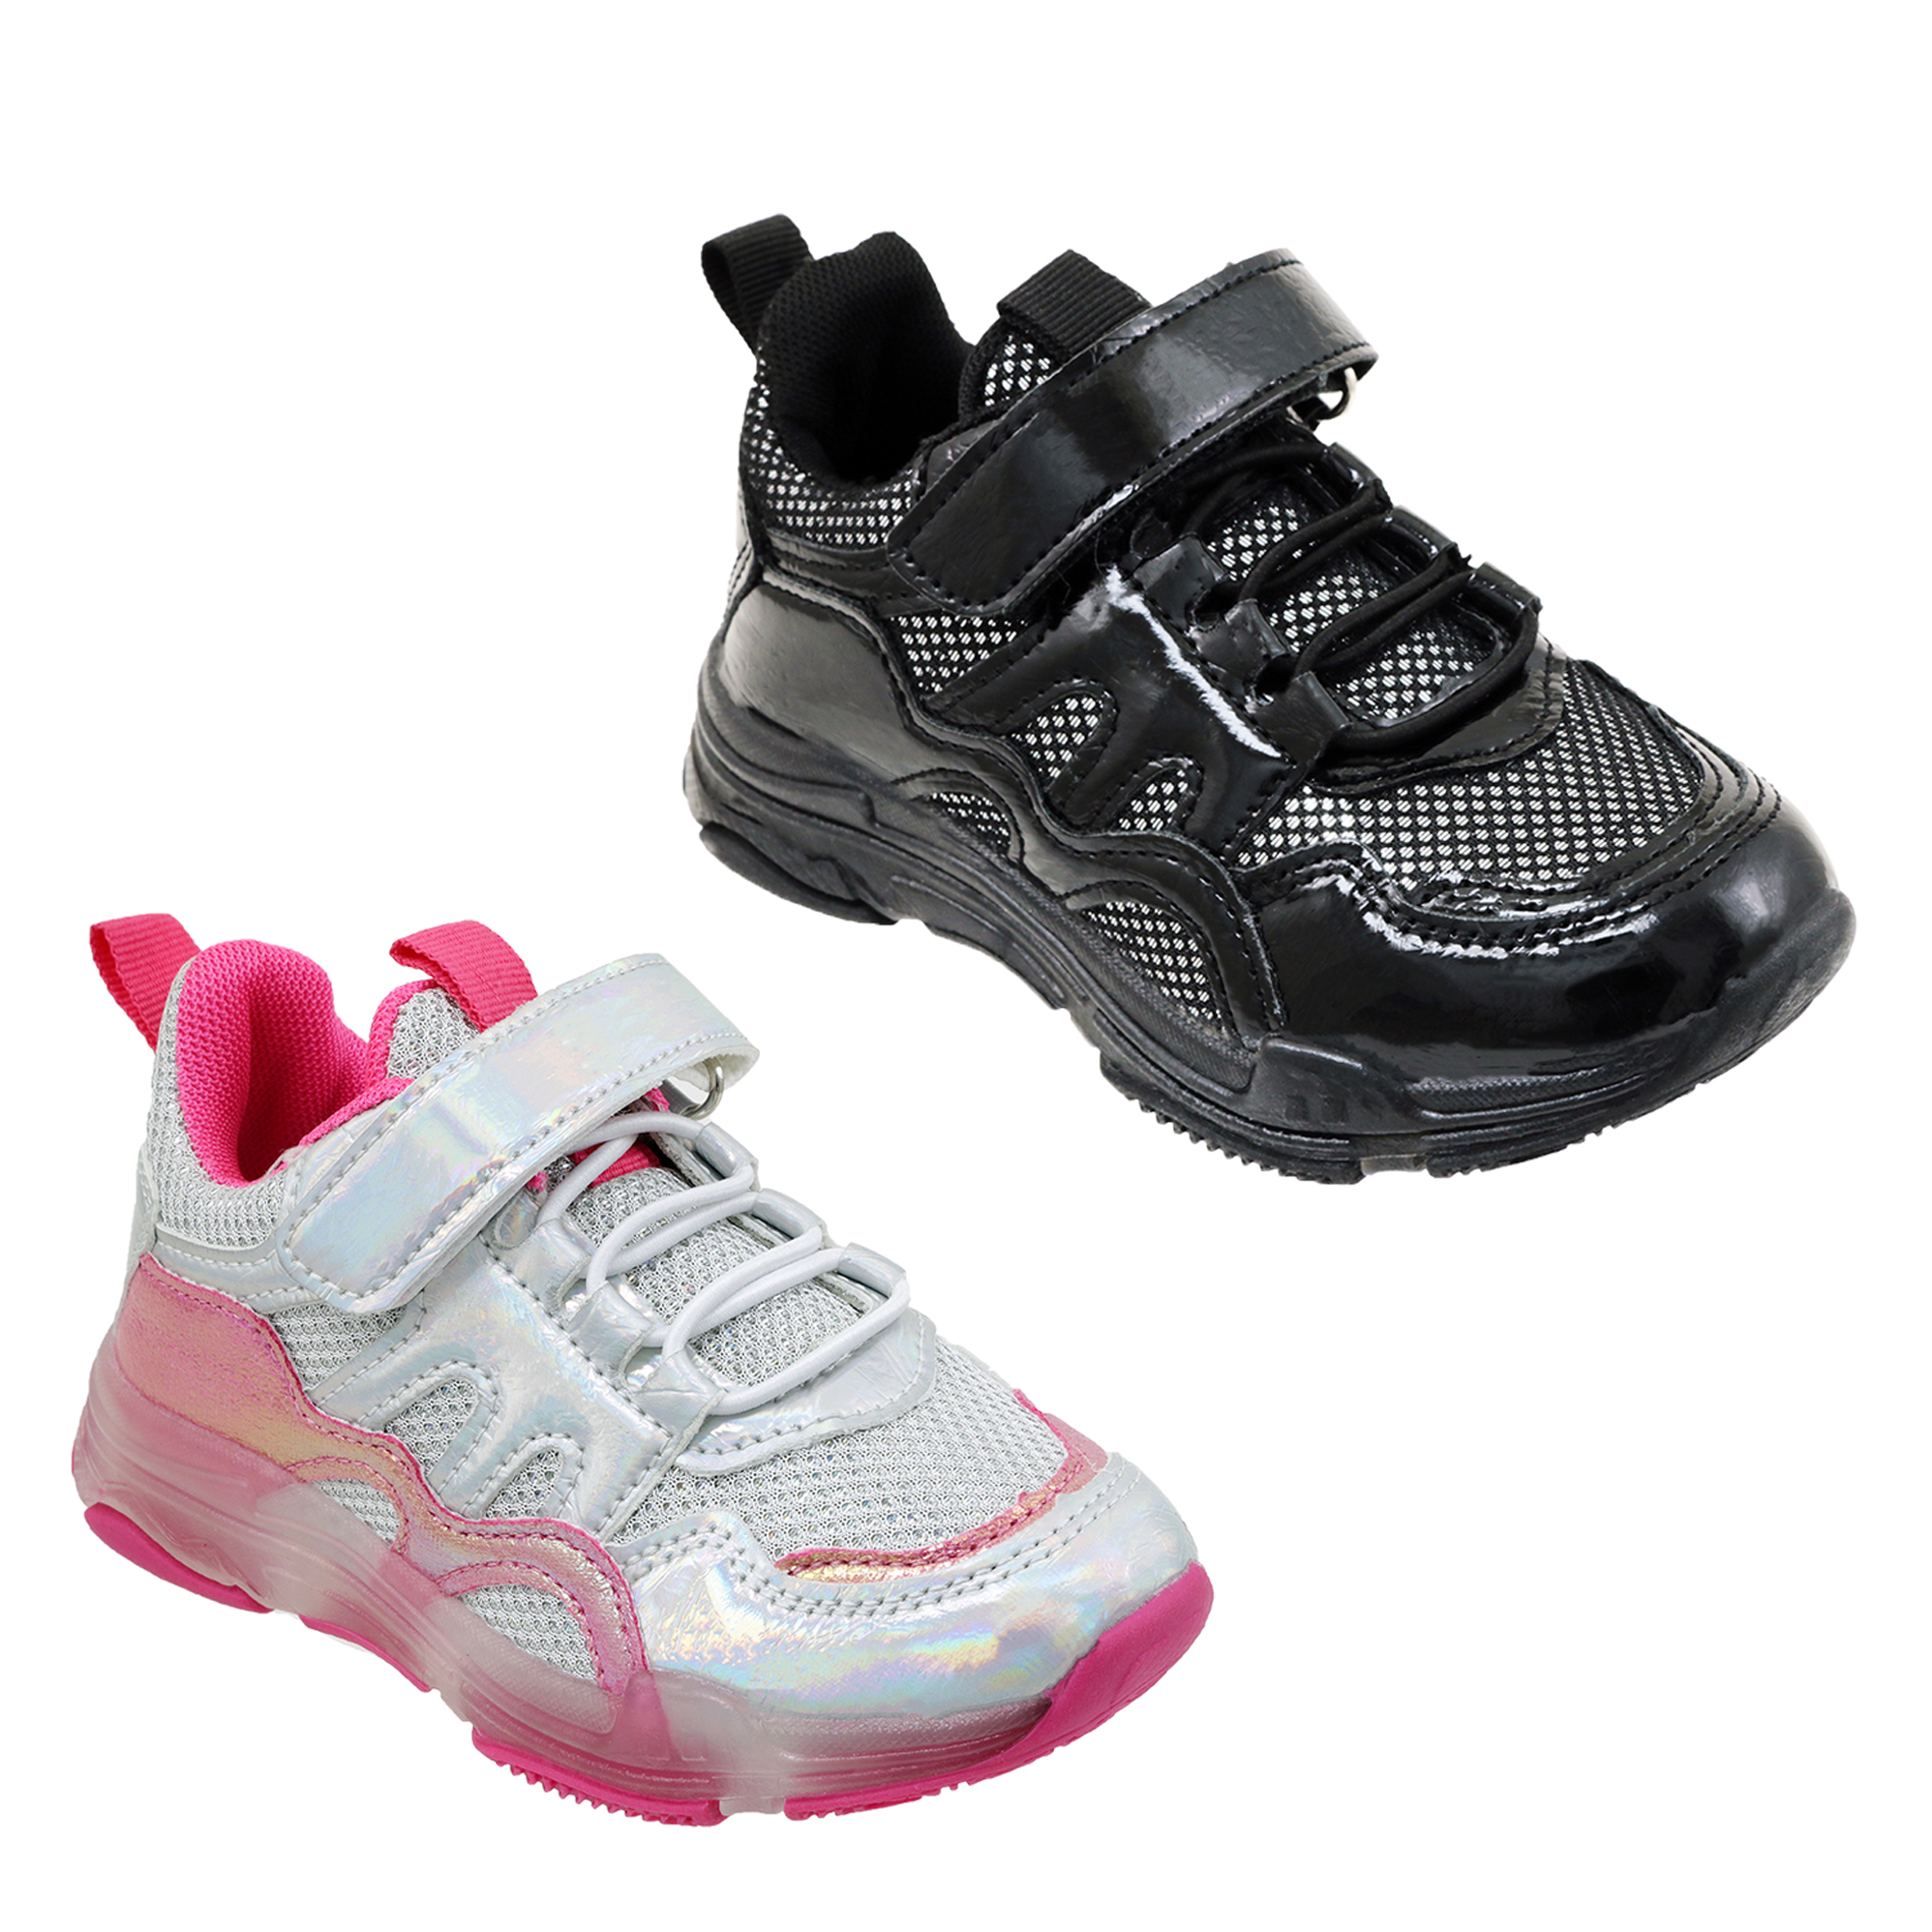 Little Girl's Breathable SNEAKERS w/ Adjustable Strap & Elastic Laces